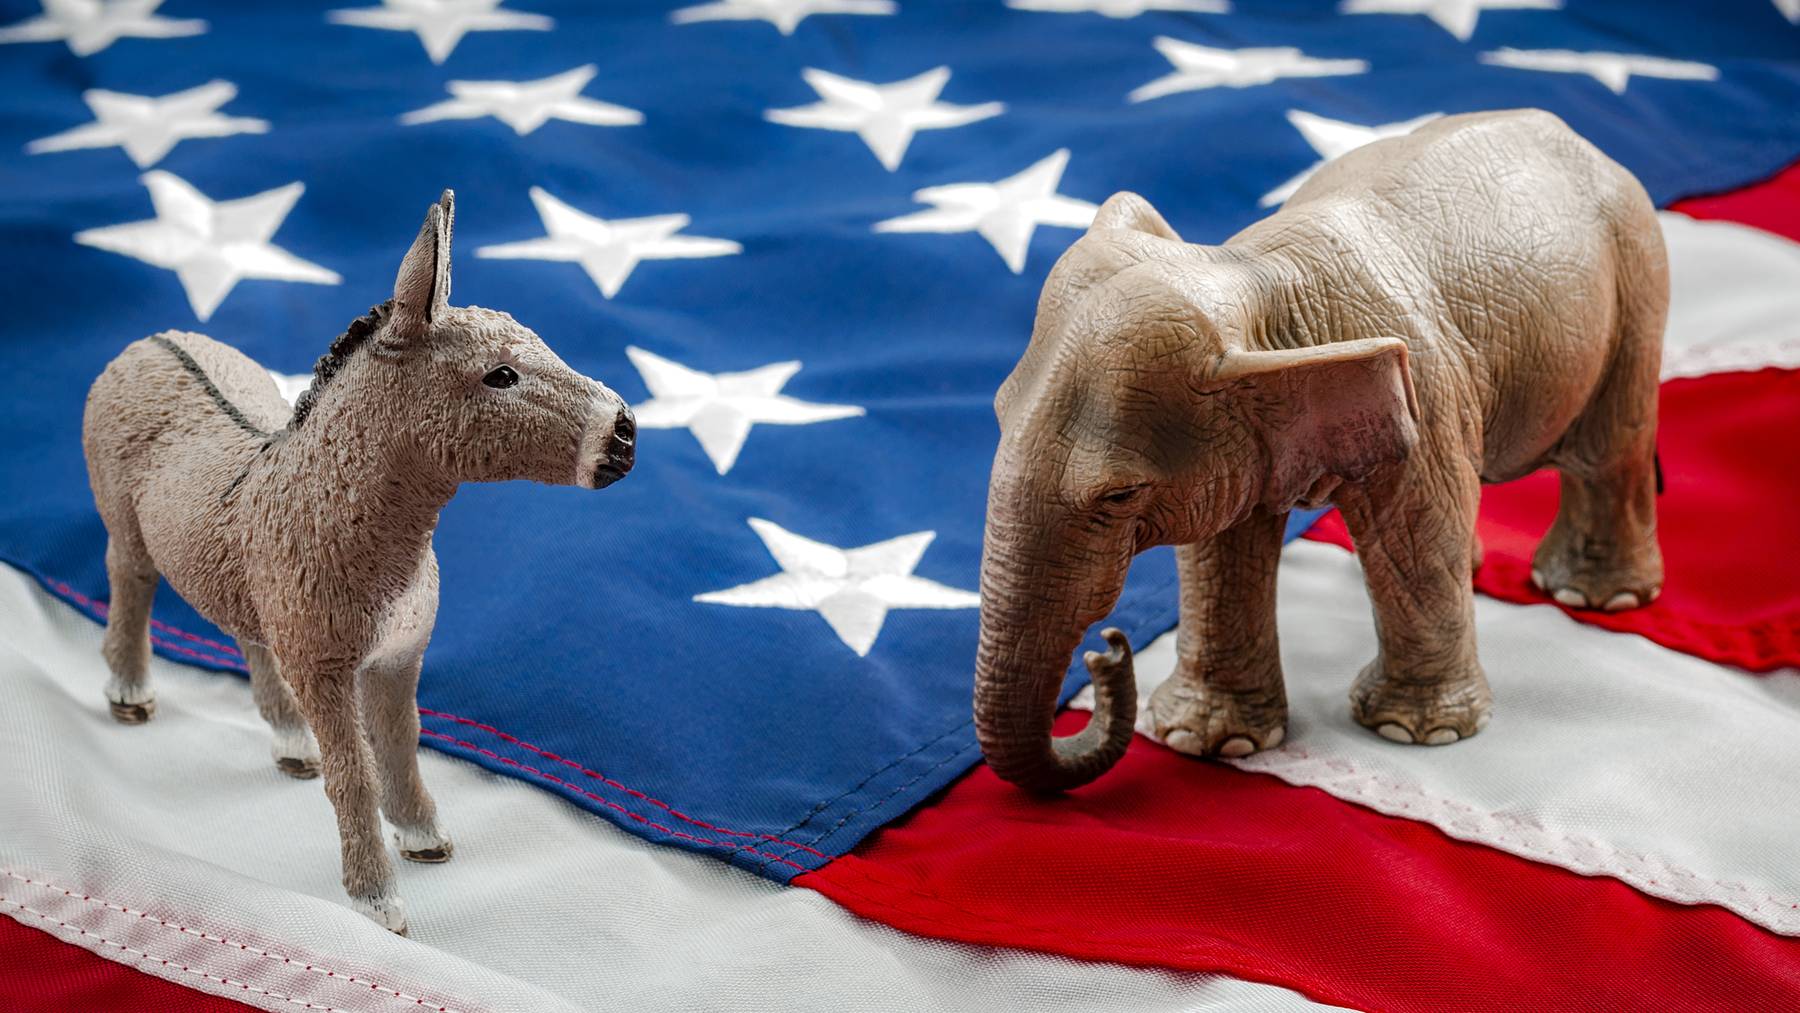 Democrats vs republicans are facing off in a ideological duel on the american flag. In American politics US parties are represented by either the democrat donkey or republican elephant